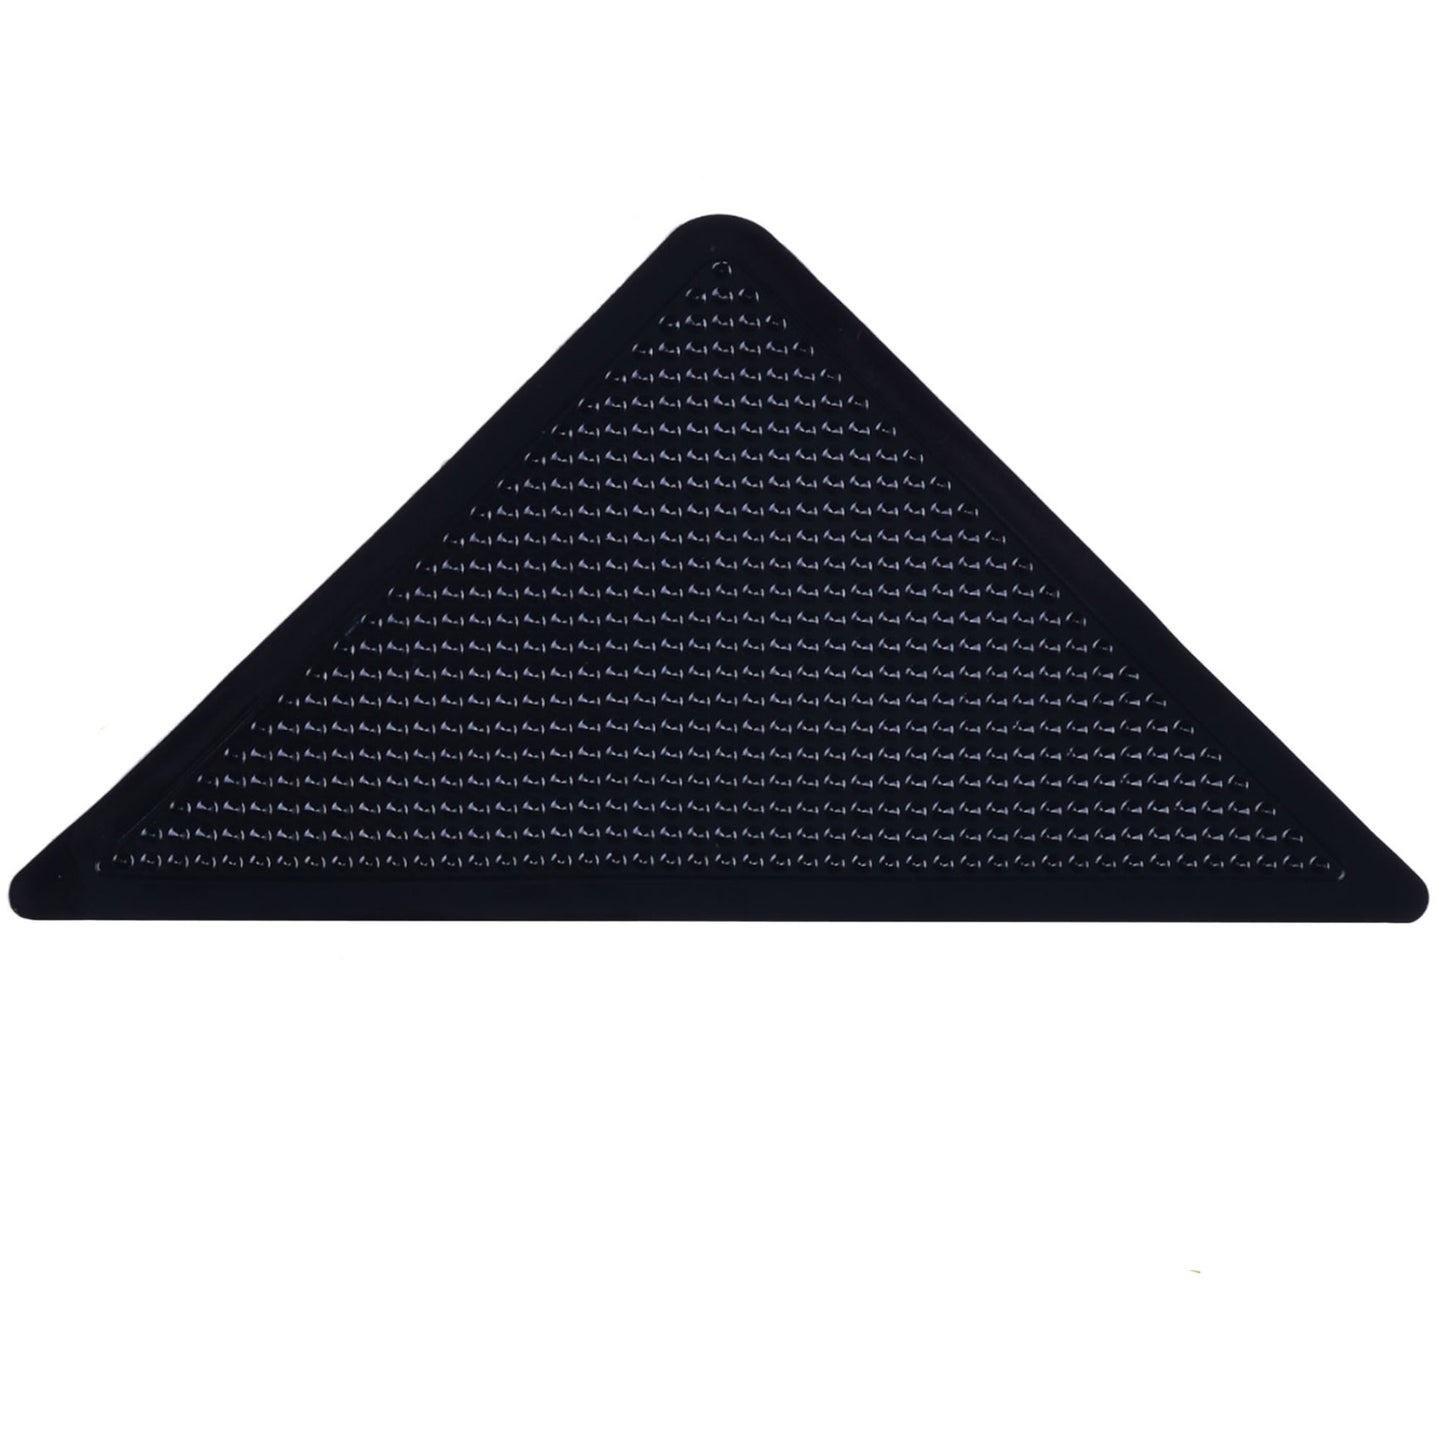 NEFOSO Rug Pads for Area Rugs, Non Slip Rug Pads for Hardwood Floors and Tiles, Dual Sided Adhesive Rug Pad Gripper Keep Corners Flat (Black)